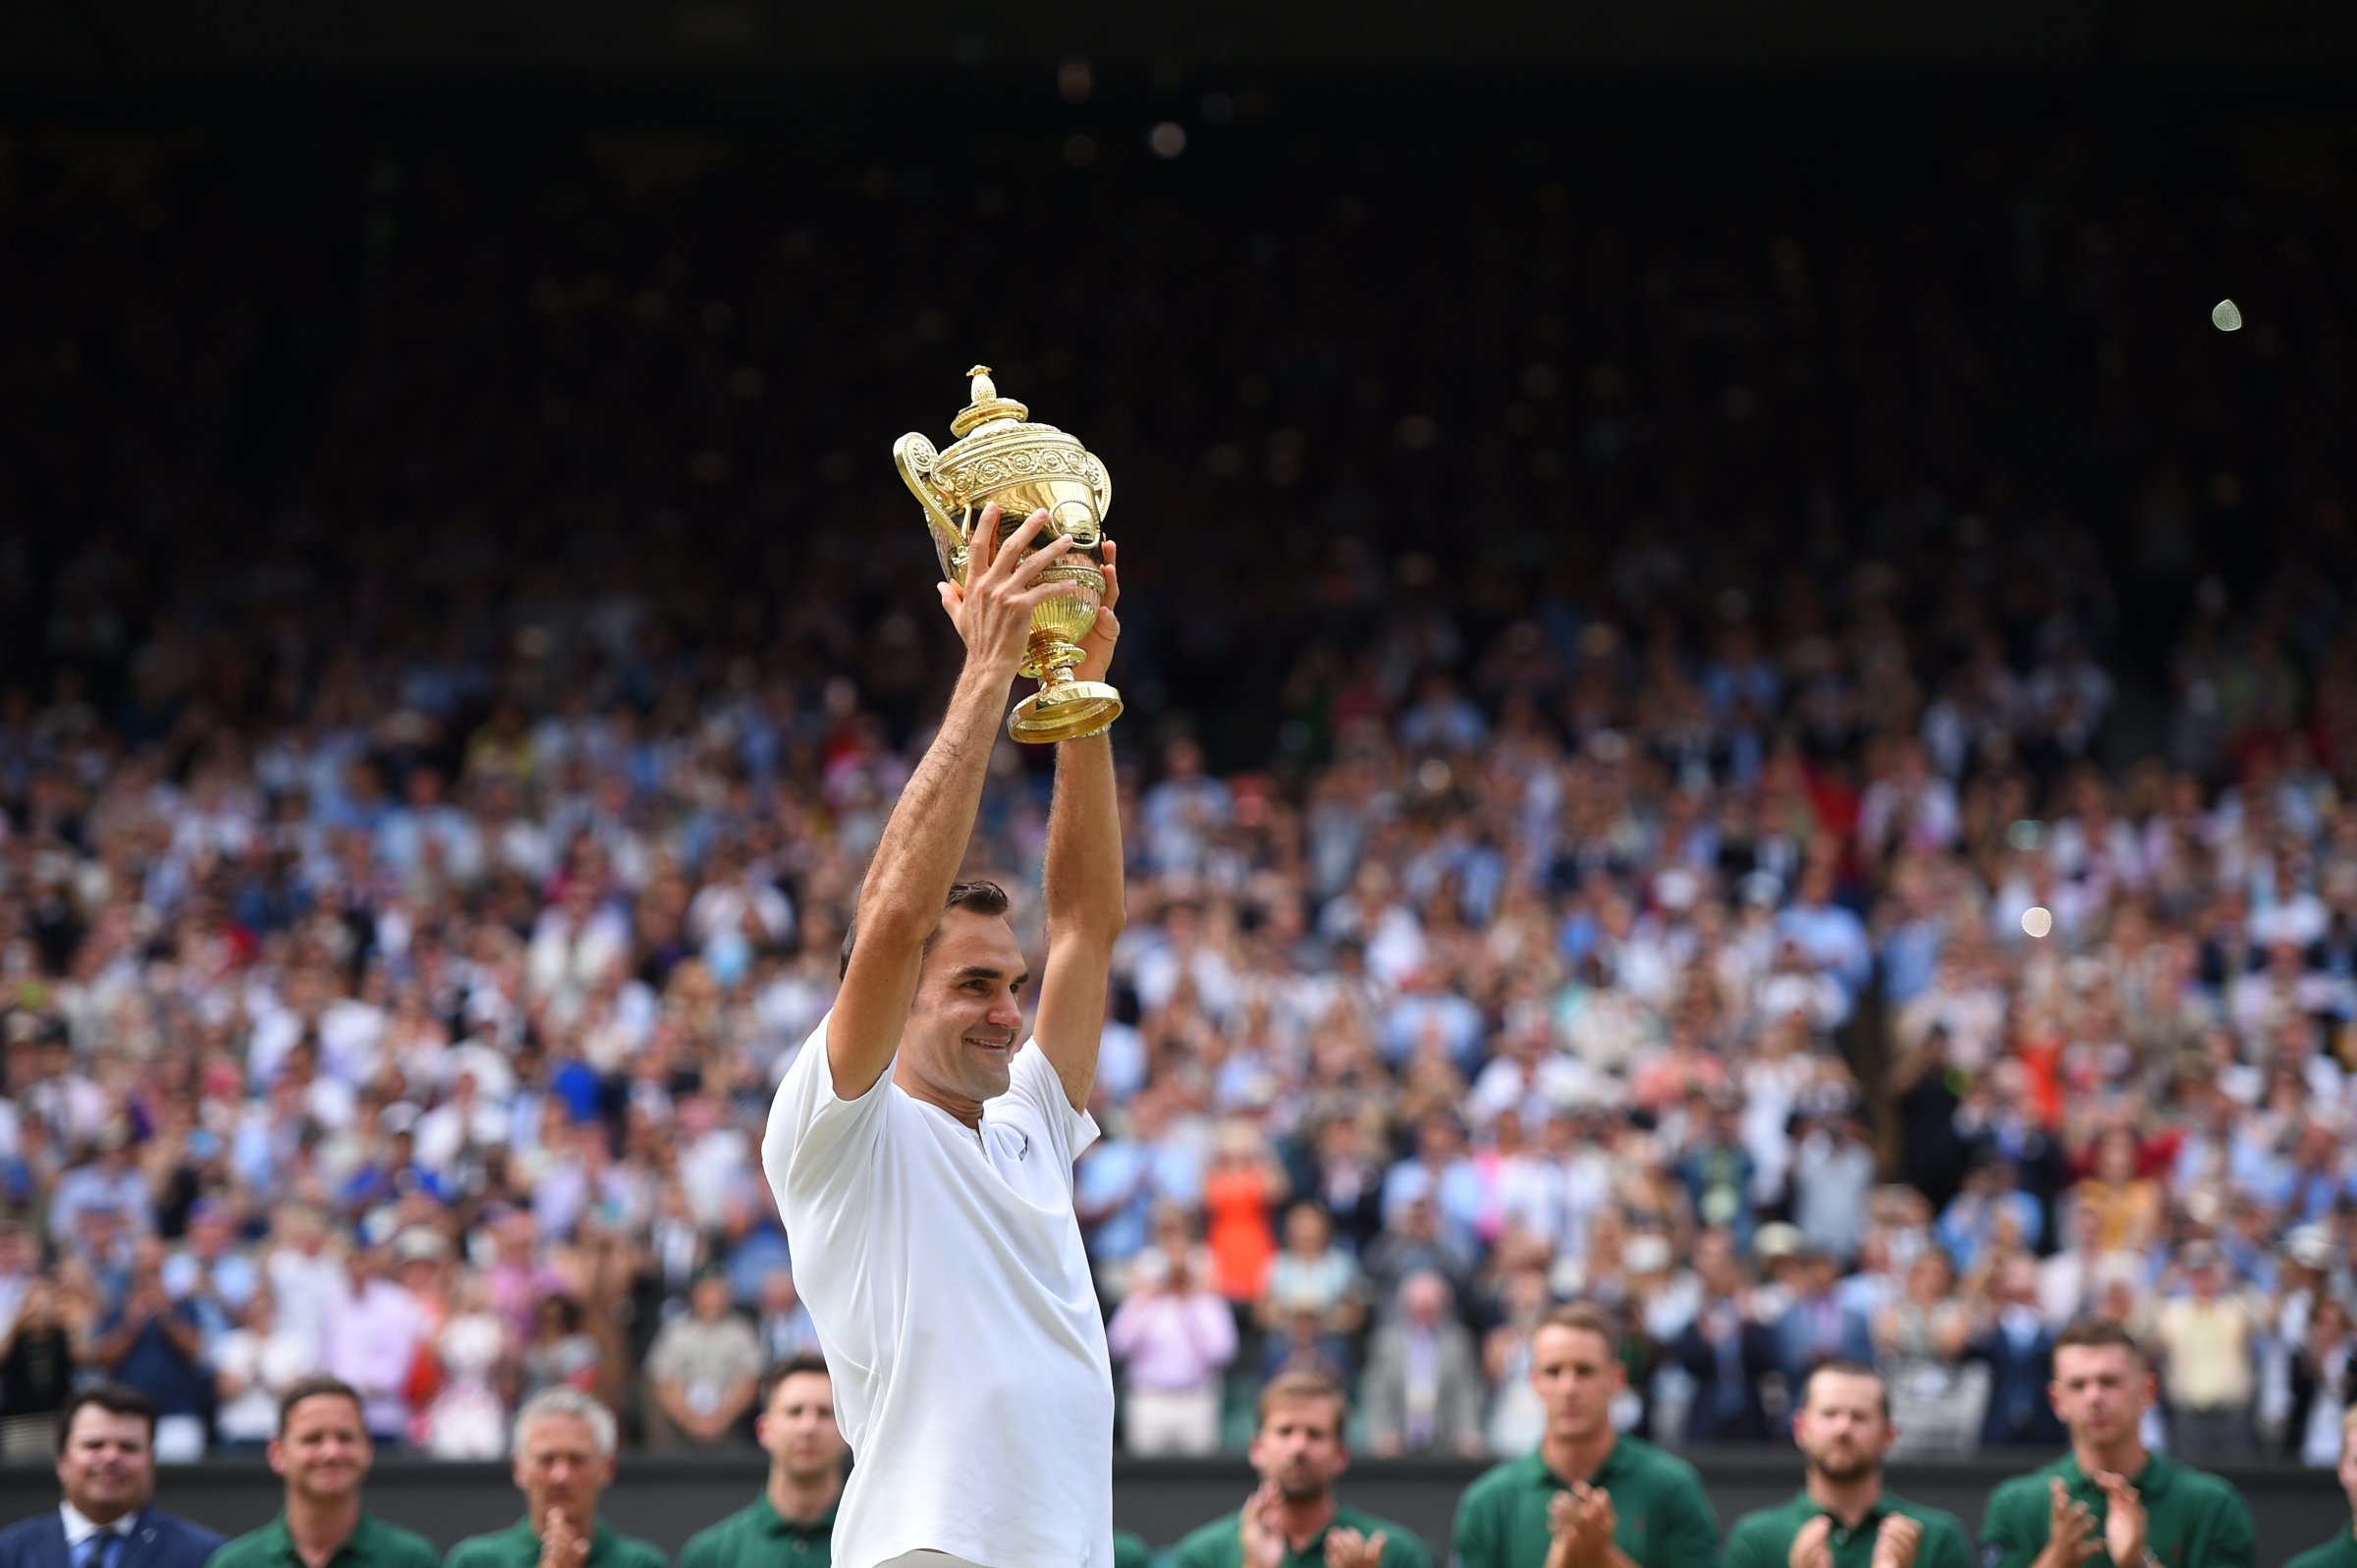 Roger Federer wins his 8th Wimbledon title after defeating Marin Cilic in the final at the 2017 Wimbledon Championships at the AELTC in London, on July 16, 2017.